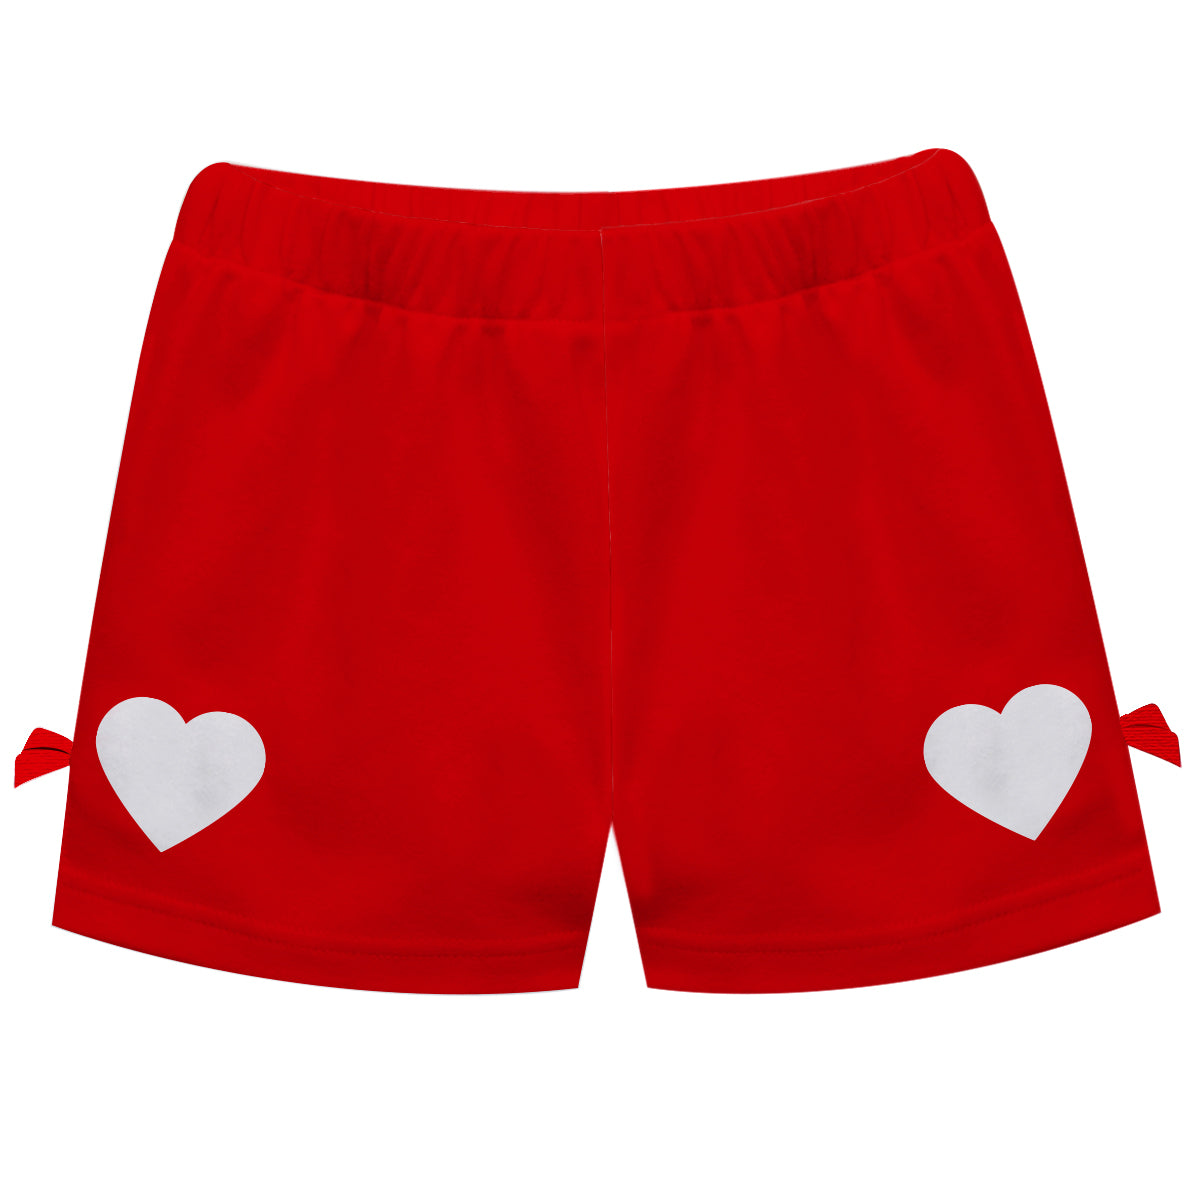 Hearts Red Bows Short - Wimziy&Co.